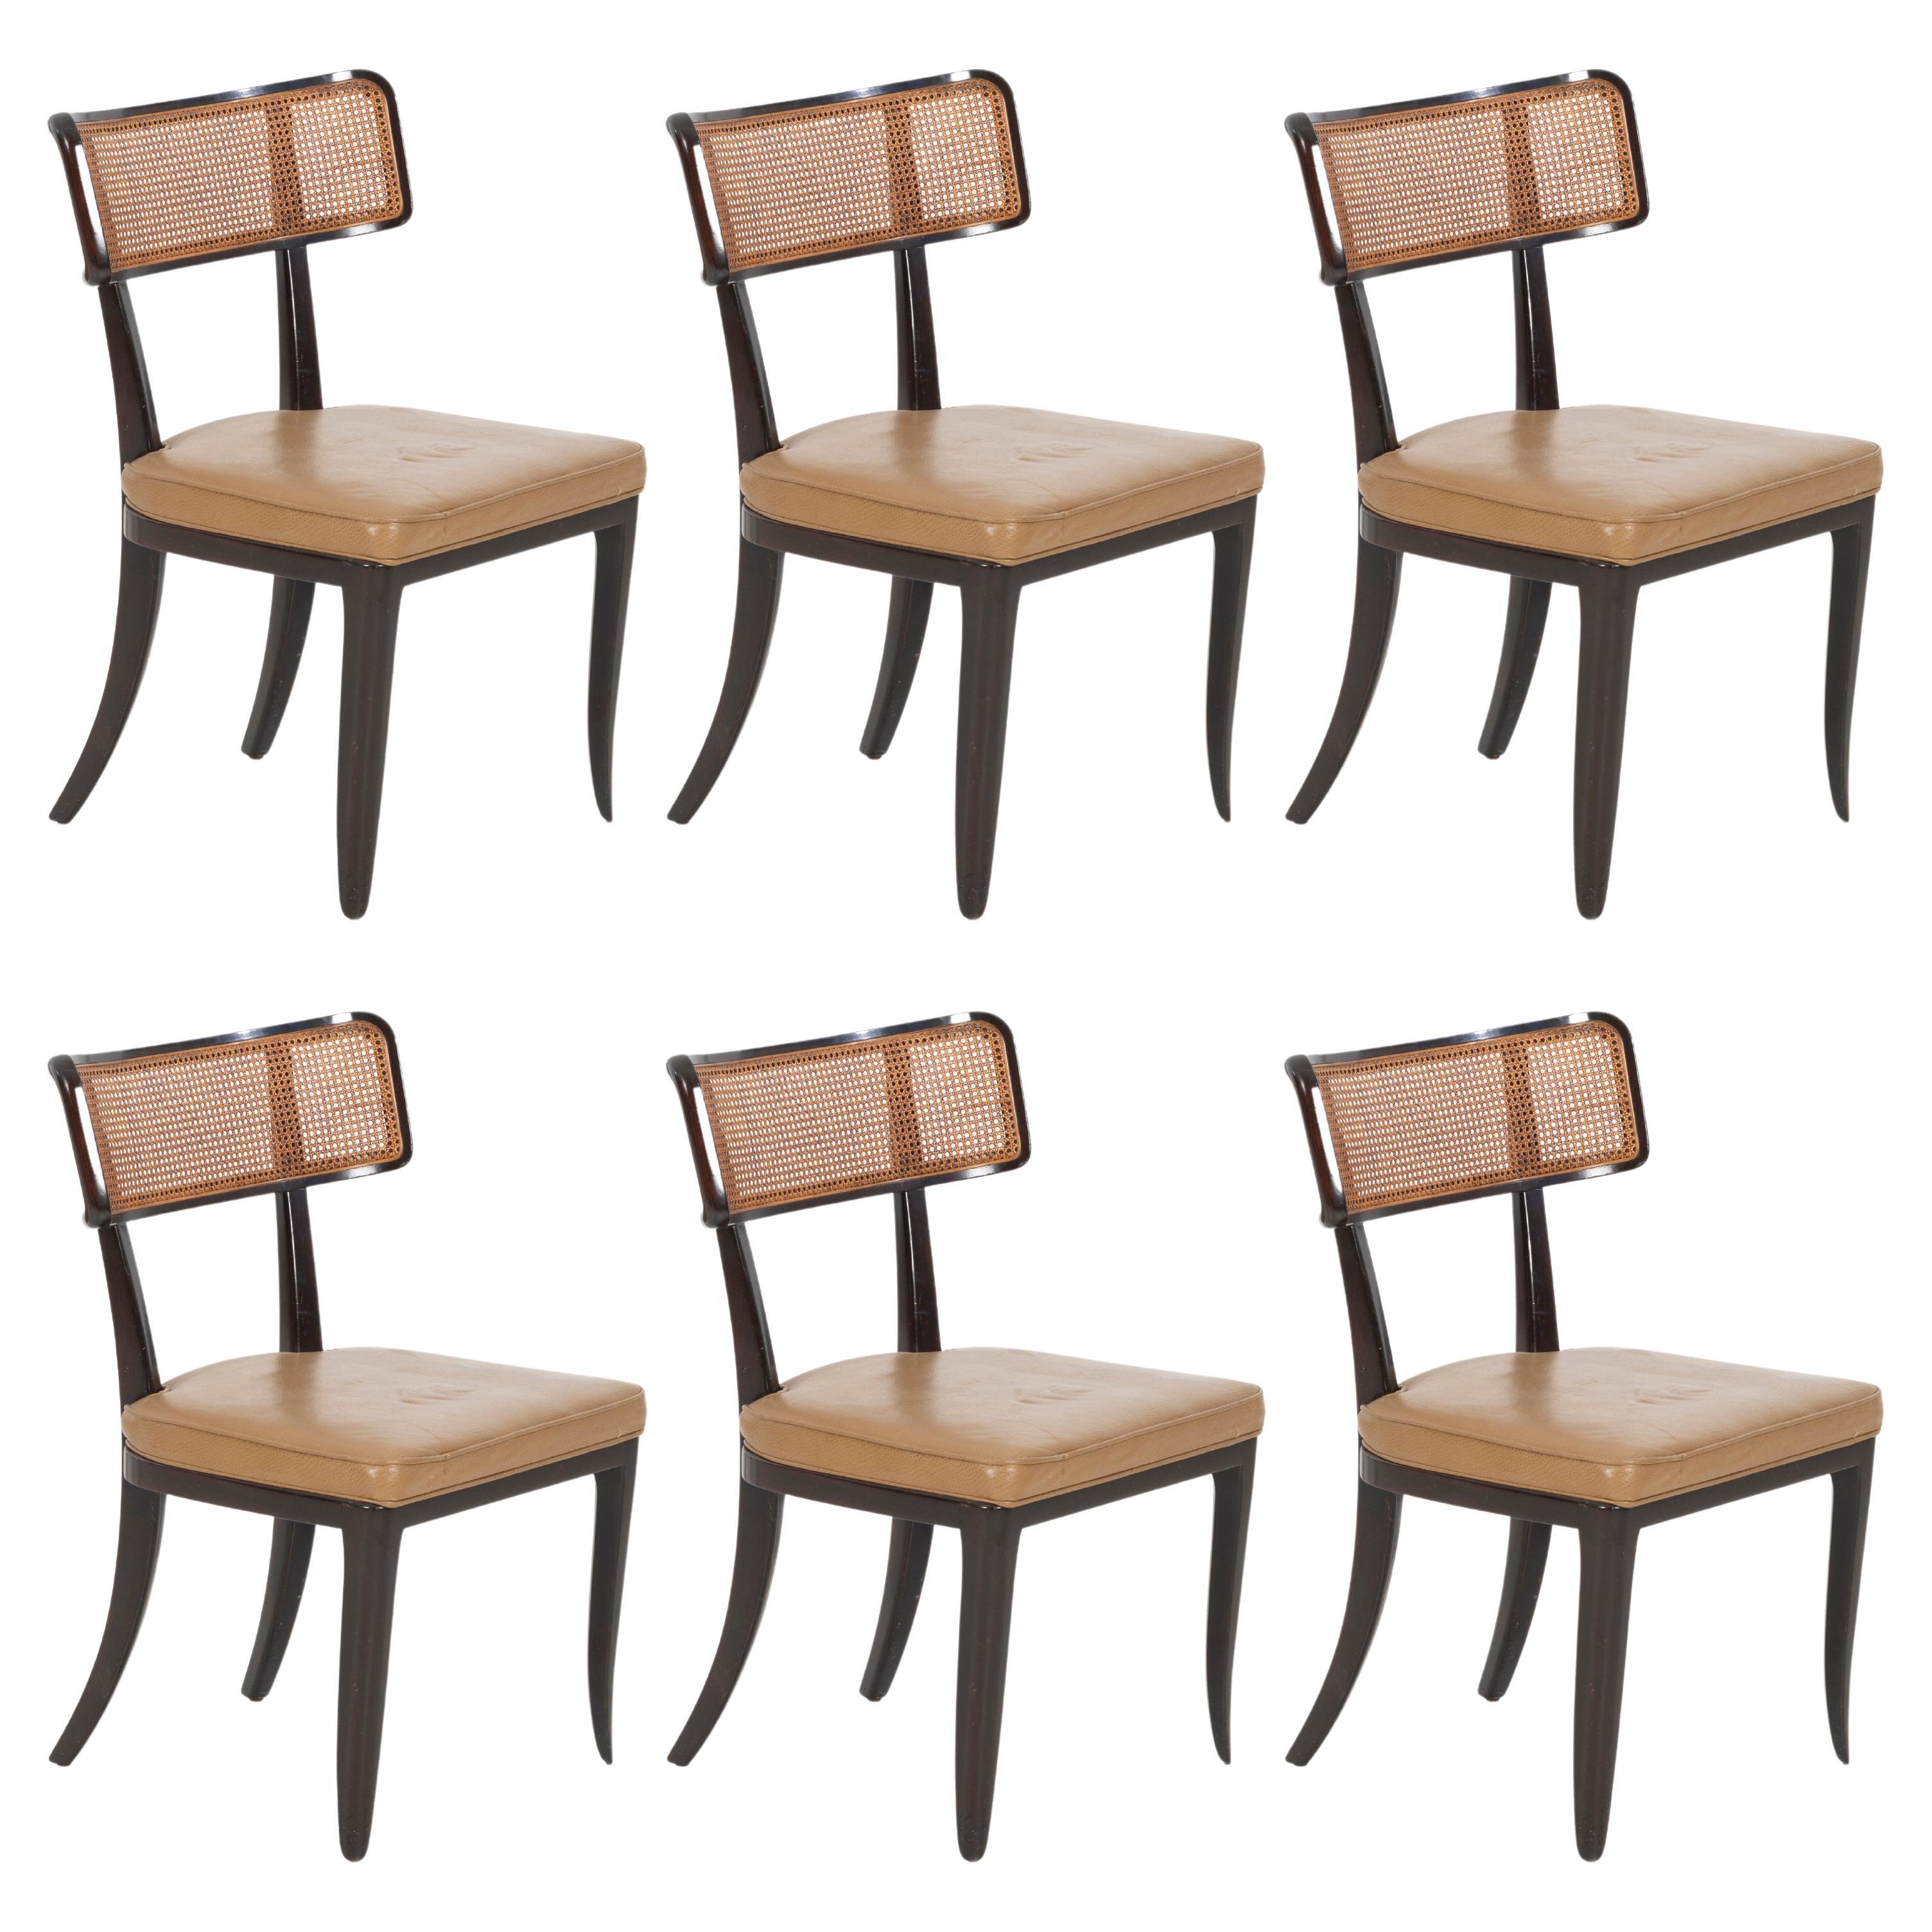 Set of Six Edward Wormley for Dunbar Curved-Back Dining Chairs